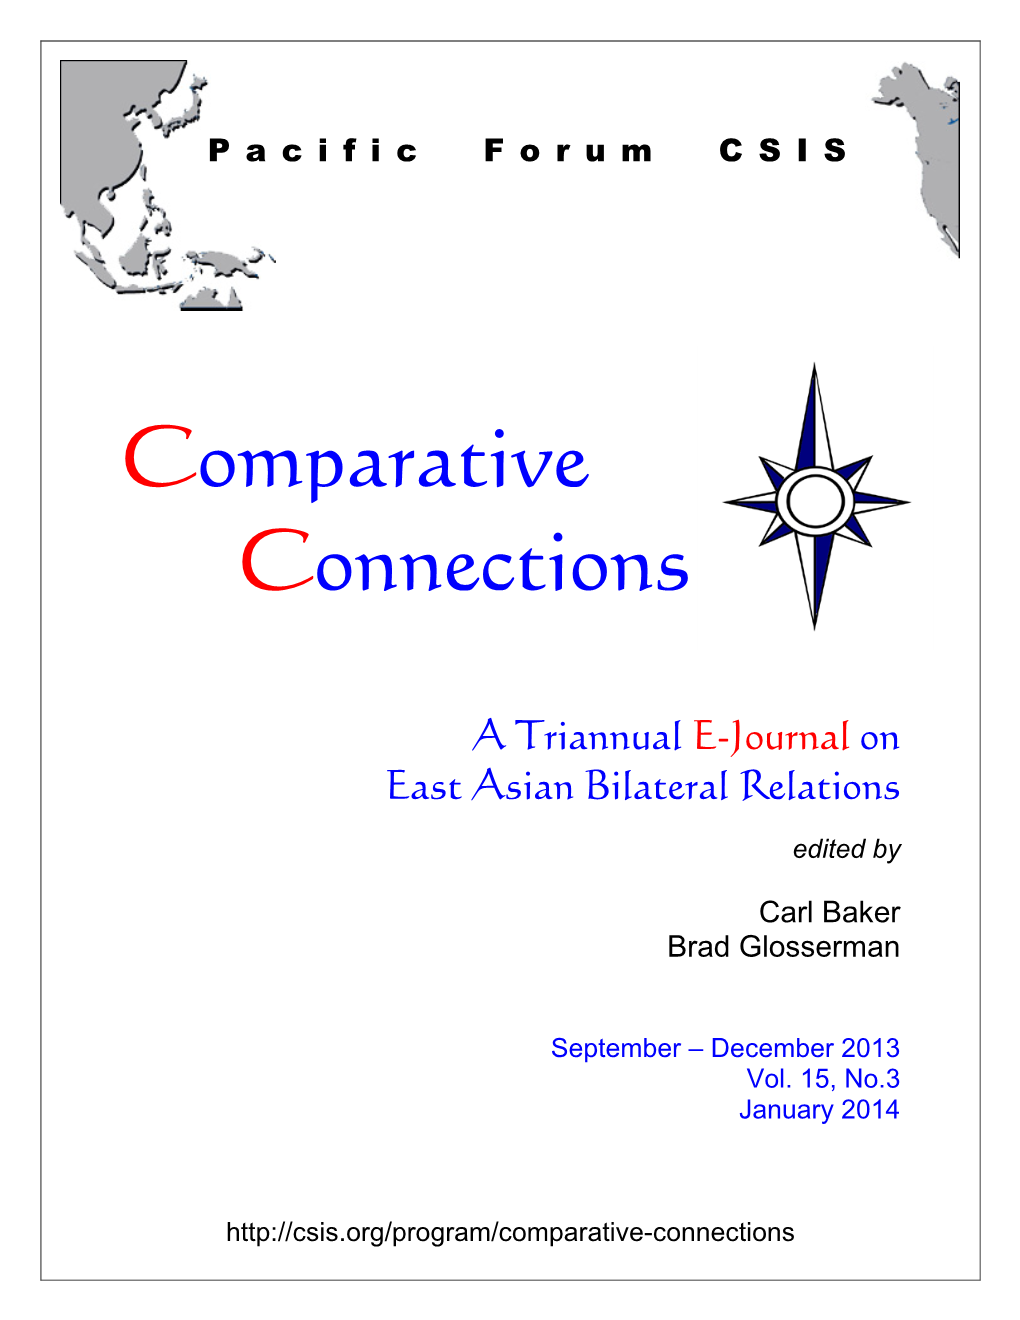 A Triannual E-Journal on East Asian Bilateral Relations